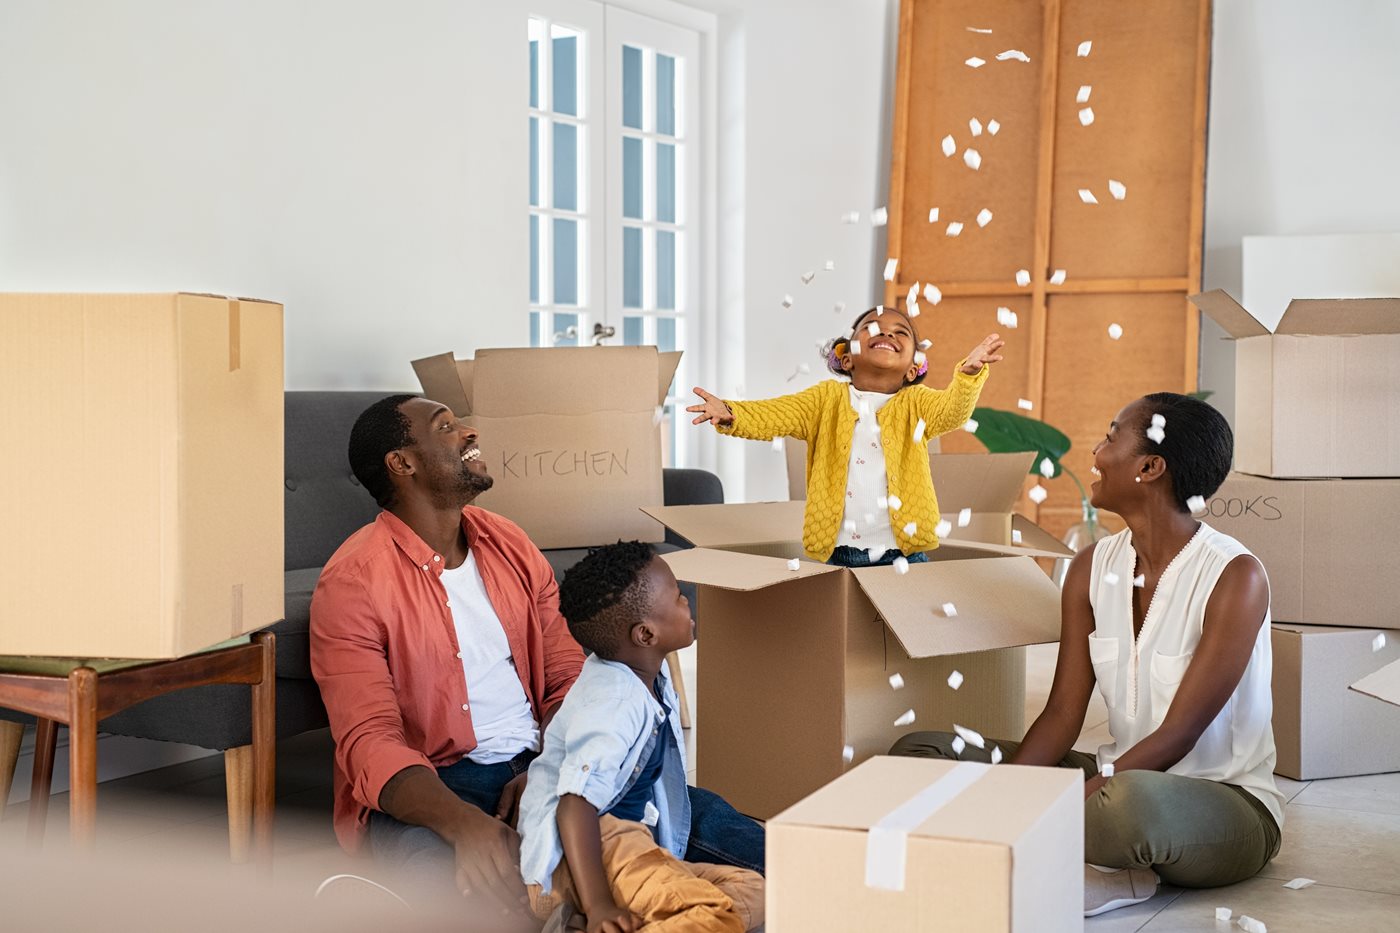 A dad, mom and son laugh while sitting on the floor of their new home surrounded by moving boxes